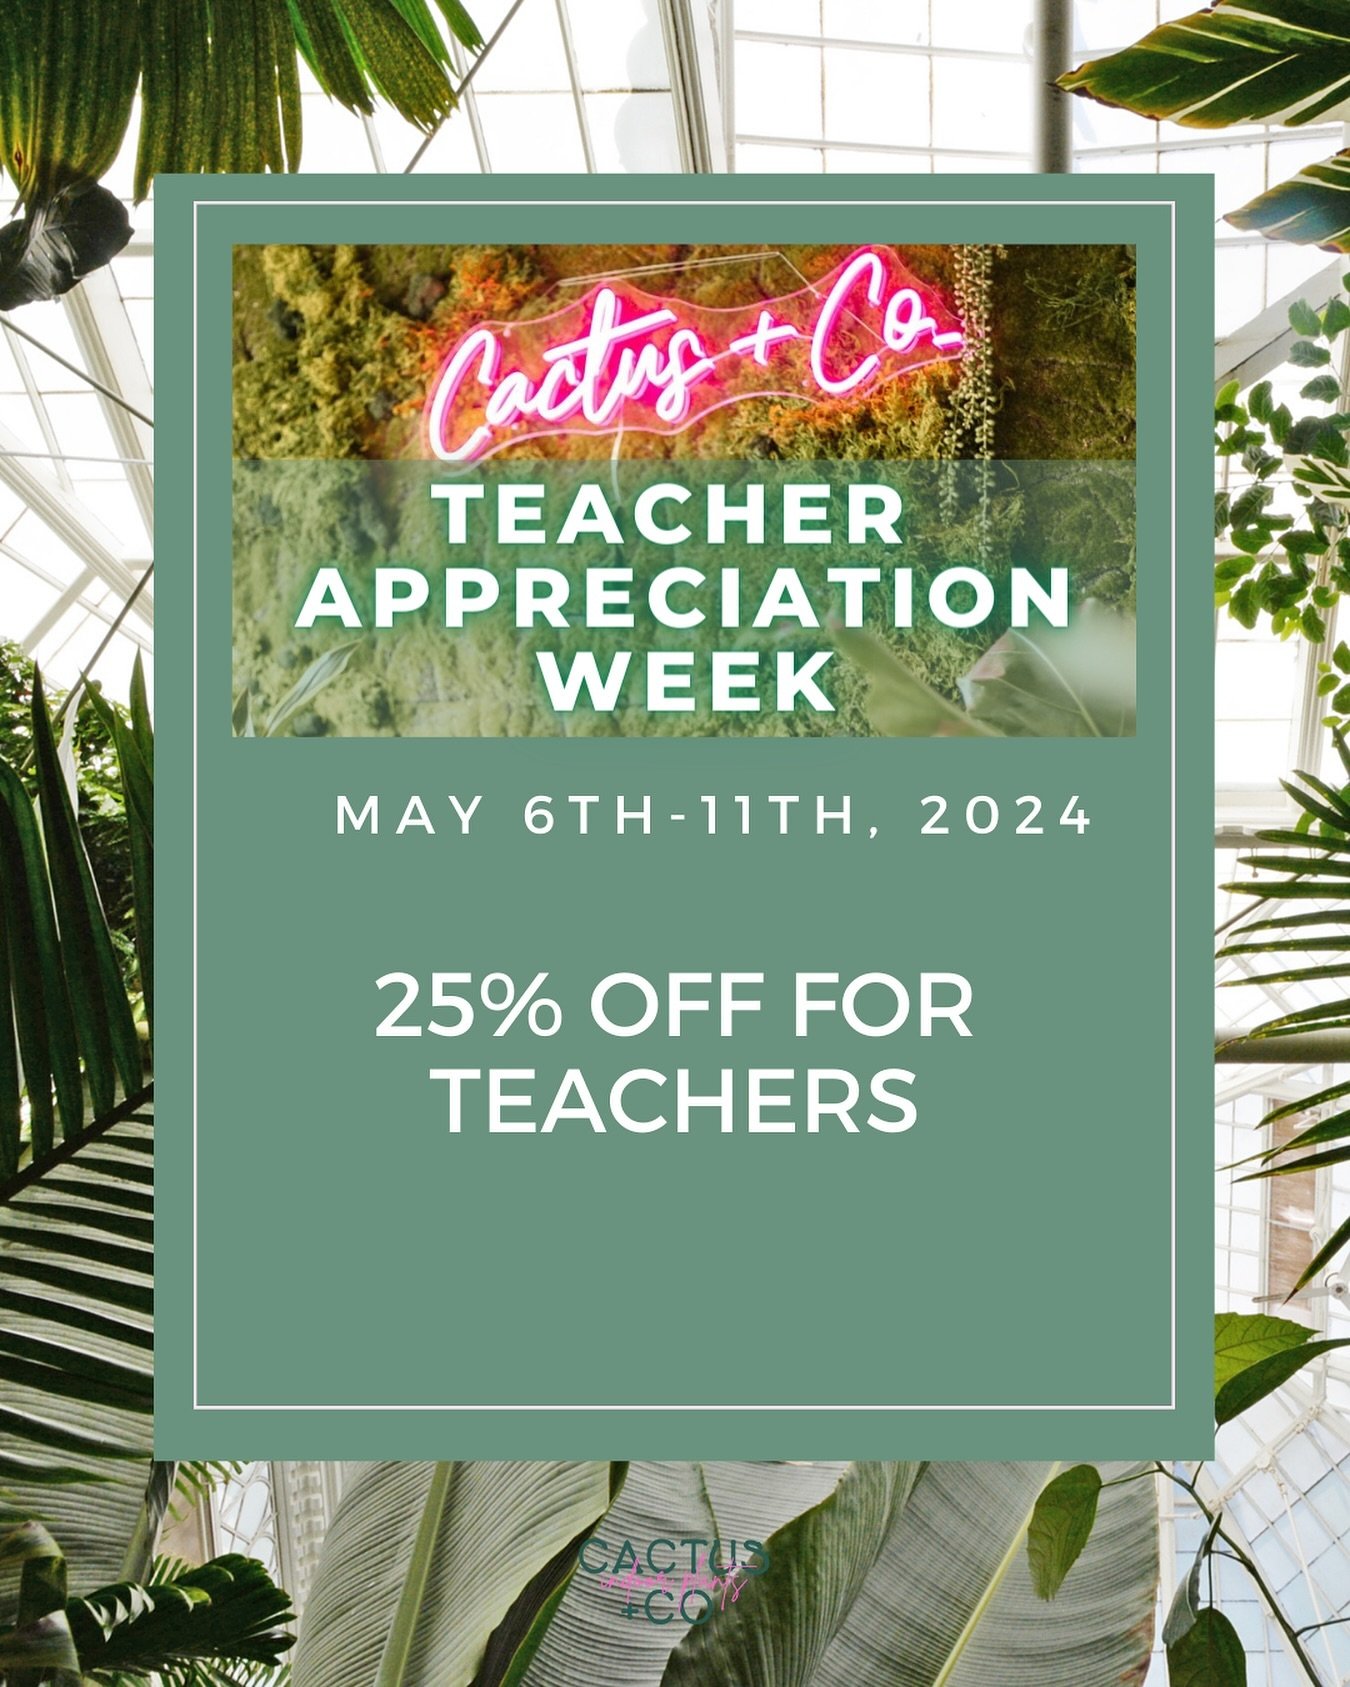 A special discount for any teachers shopping with us this week, just mention that you&rsquo;re a teacher at checkout to save 25% on your purchase 😊🌵🪴